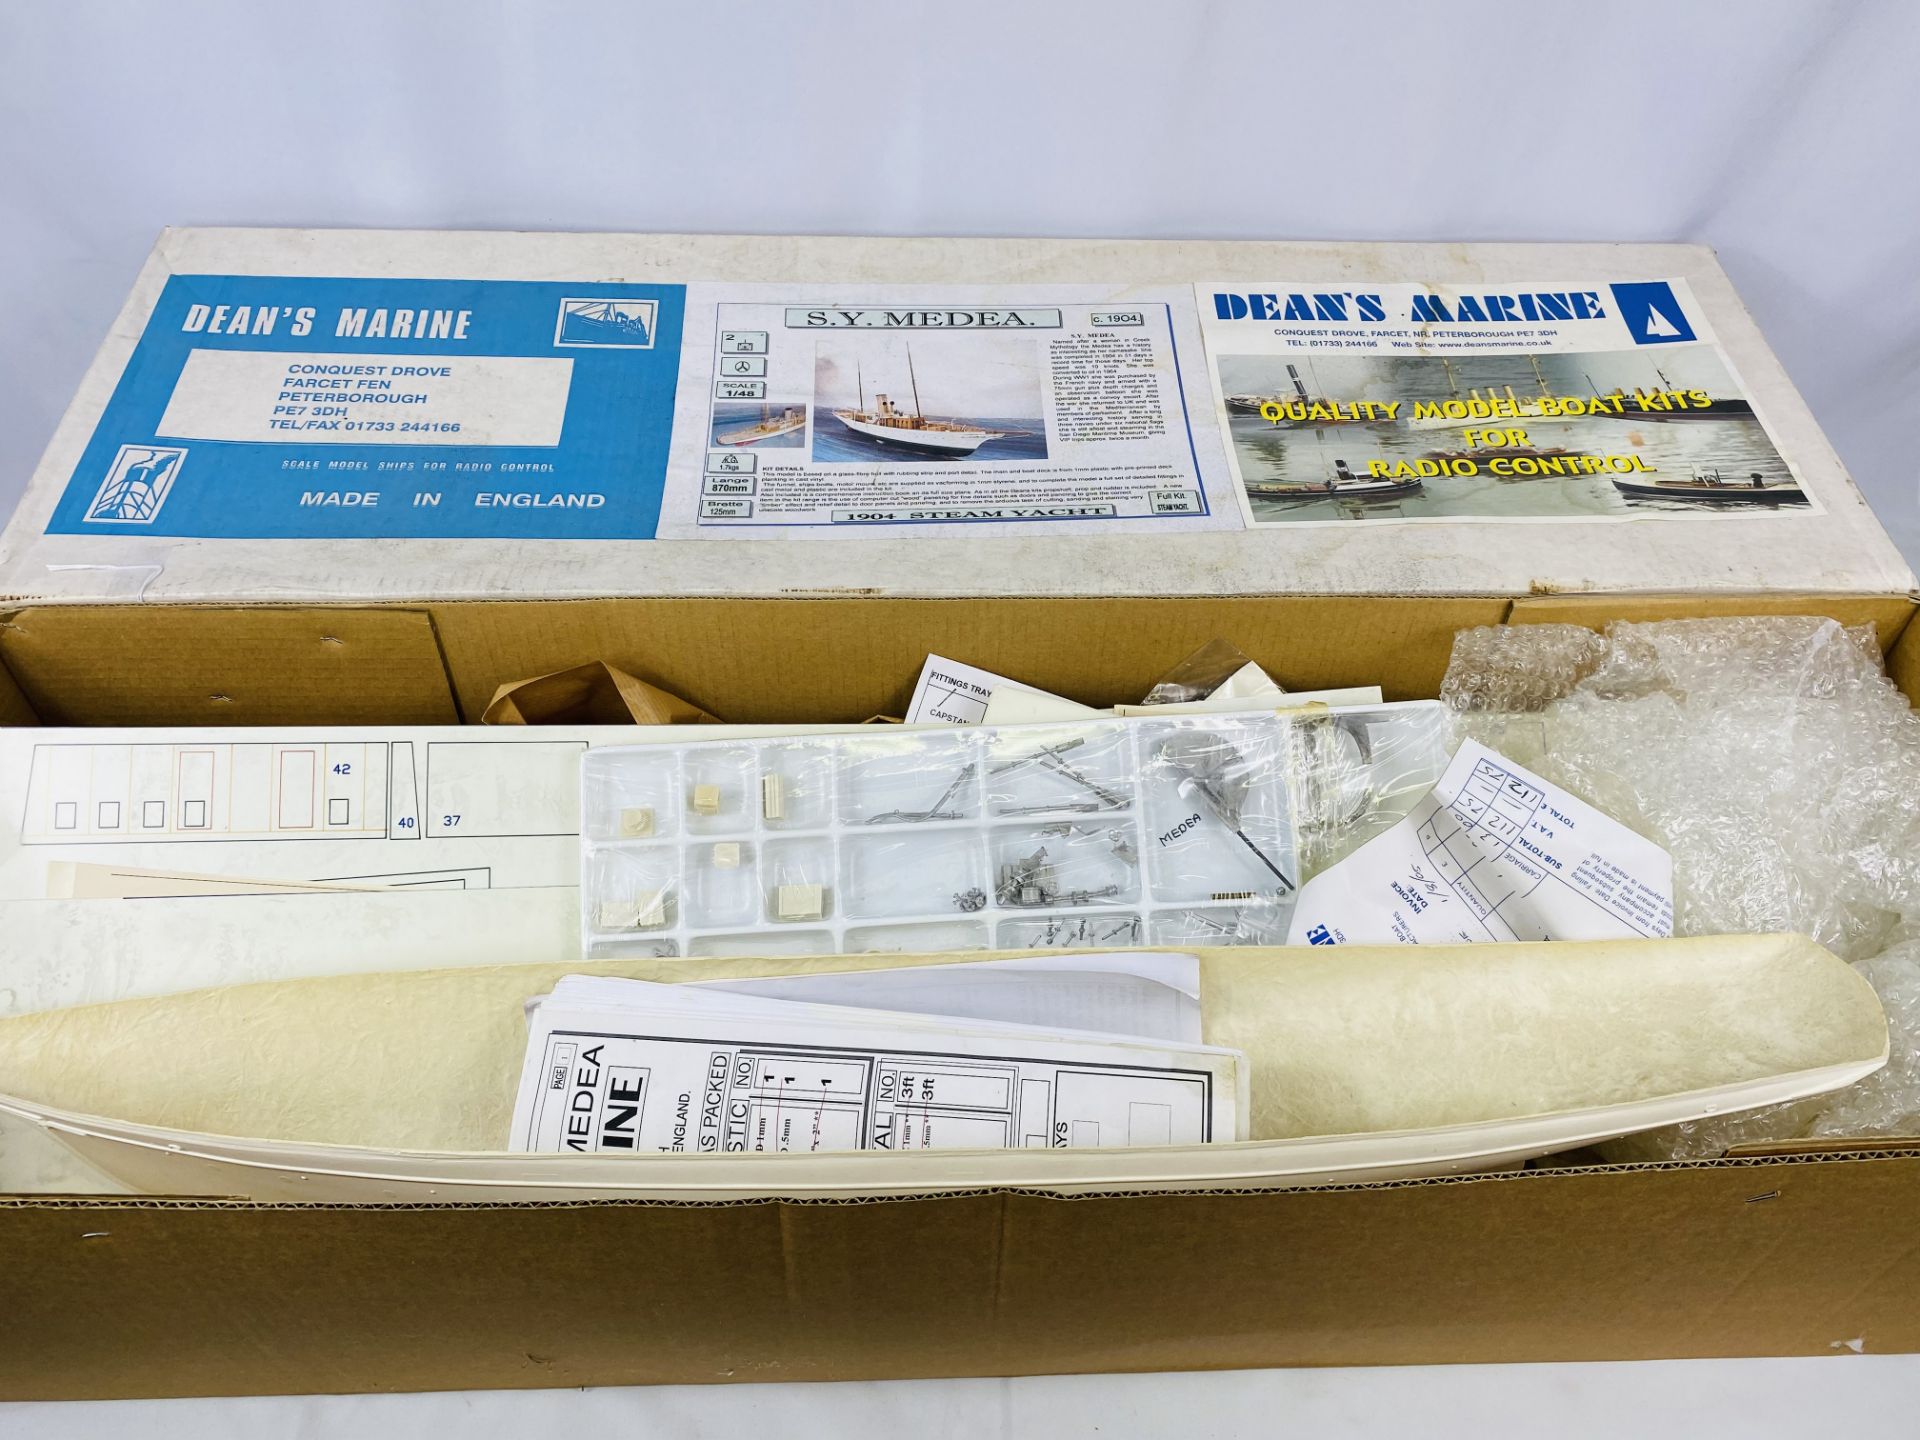 Deans marine 1:48 scale model kit of the 1904 steam yacht Media in original box.